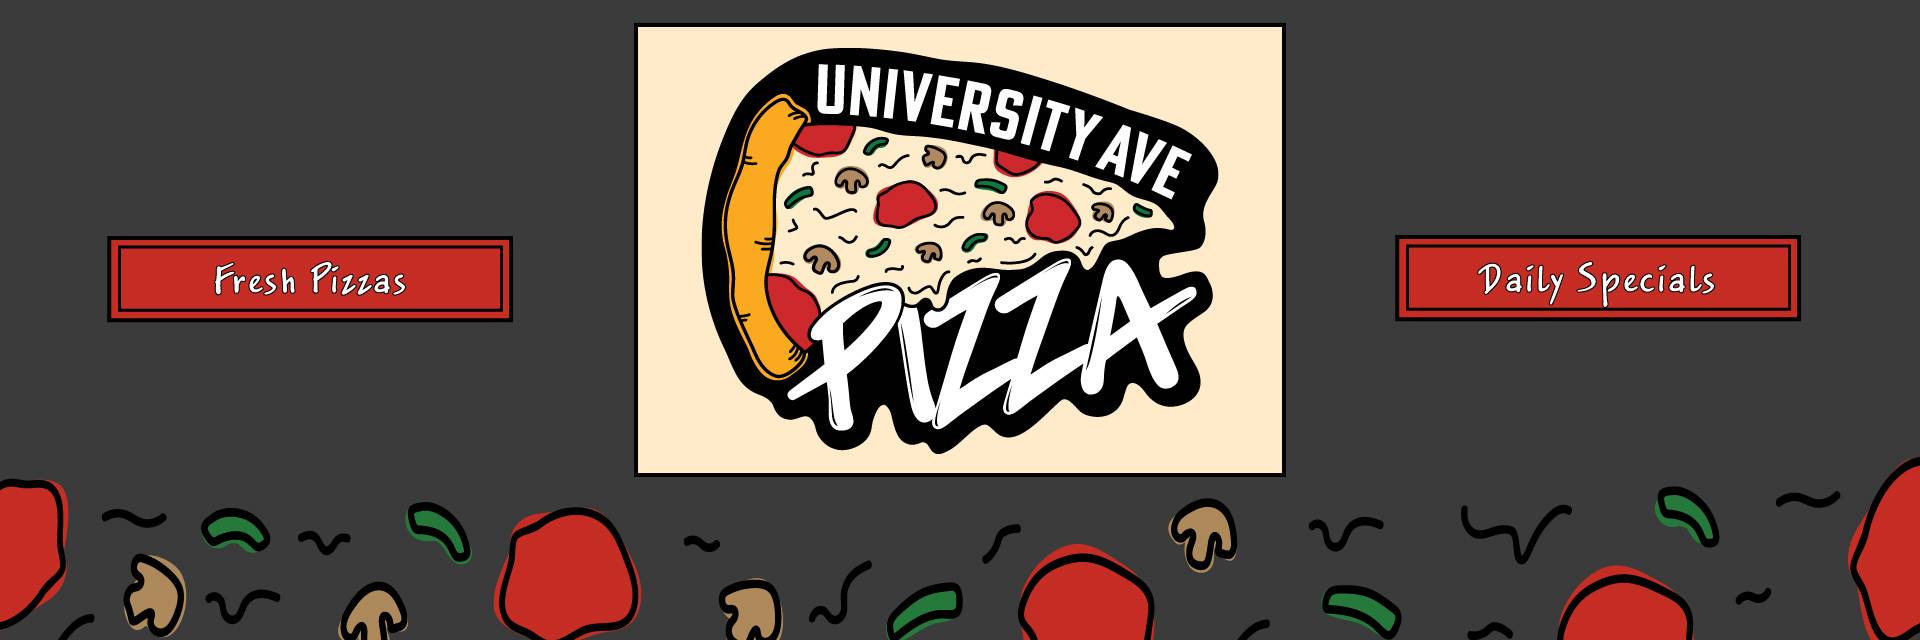 university ave pizza logo with fresh pizzas and daily specials